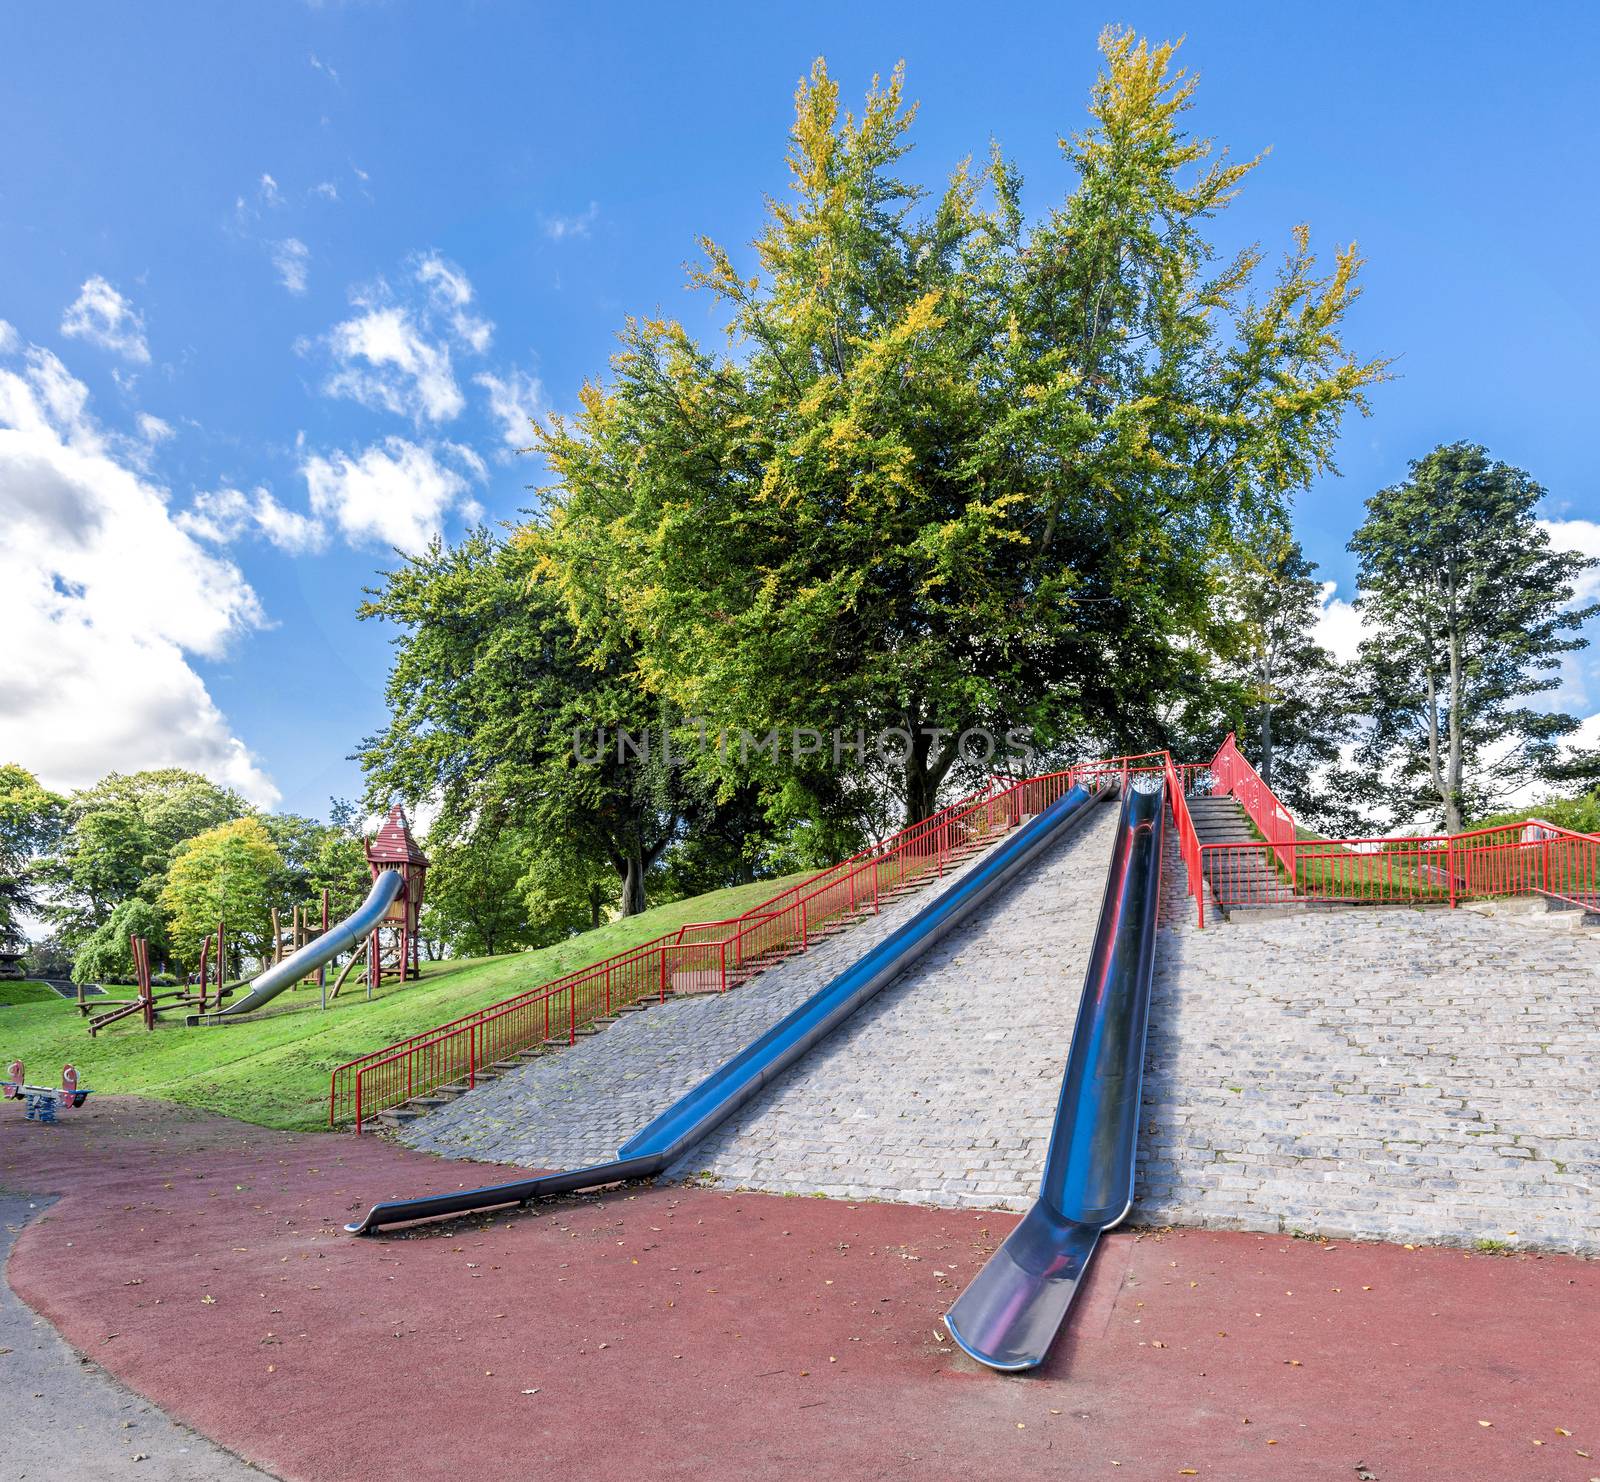 Large metal slides on top of a small hill at the entrance to Duthie park, Aberdeen, Scotland by anastasstyles